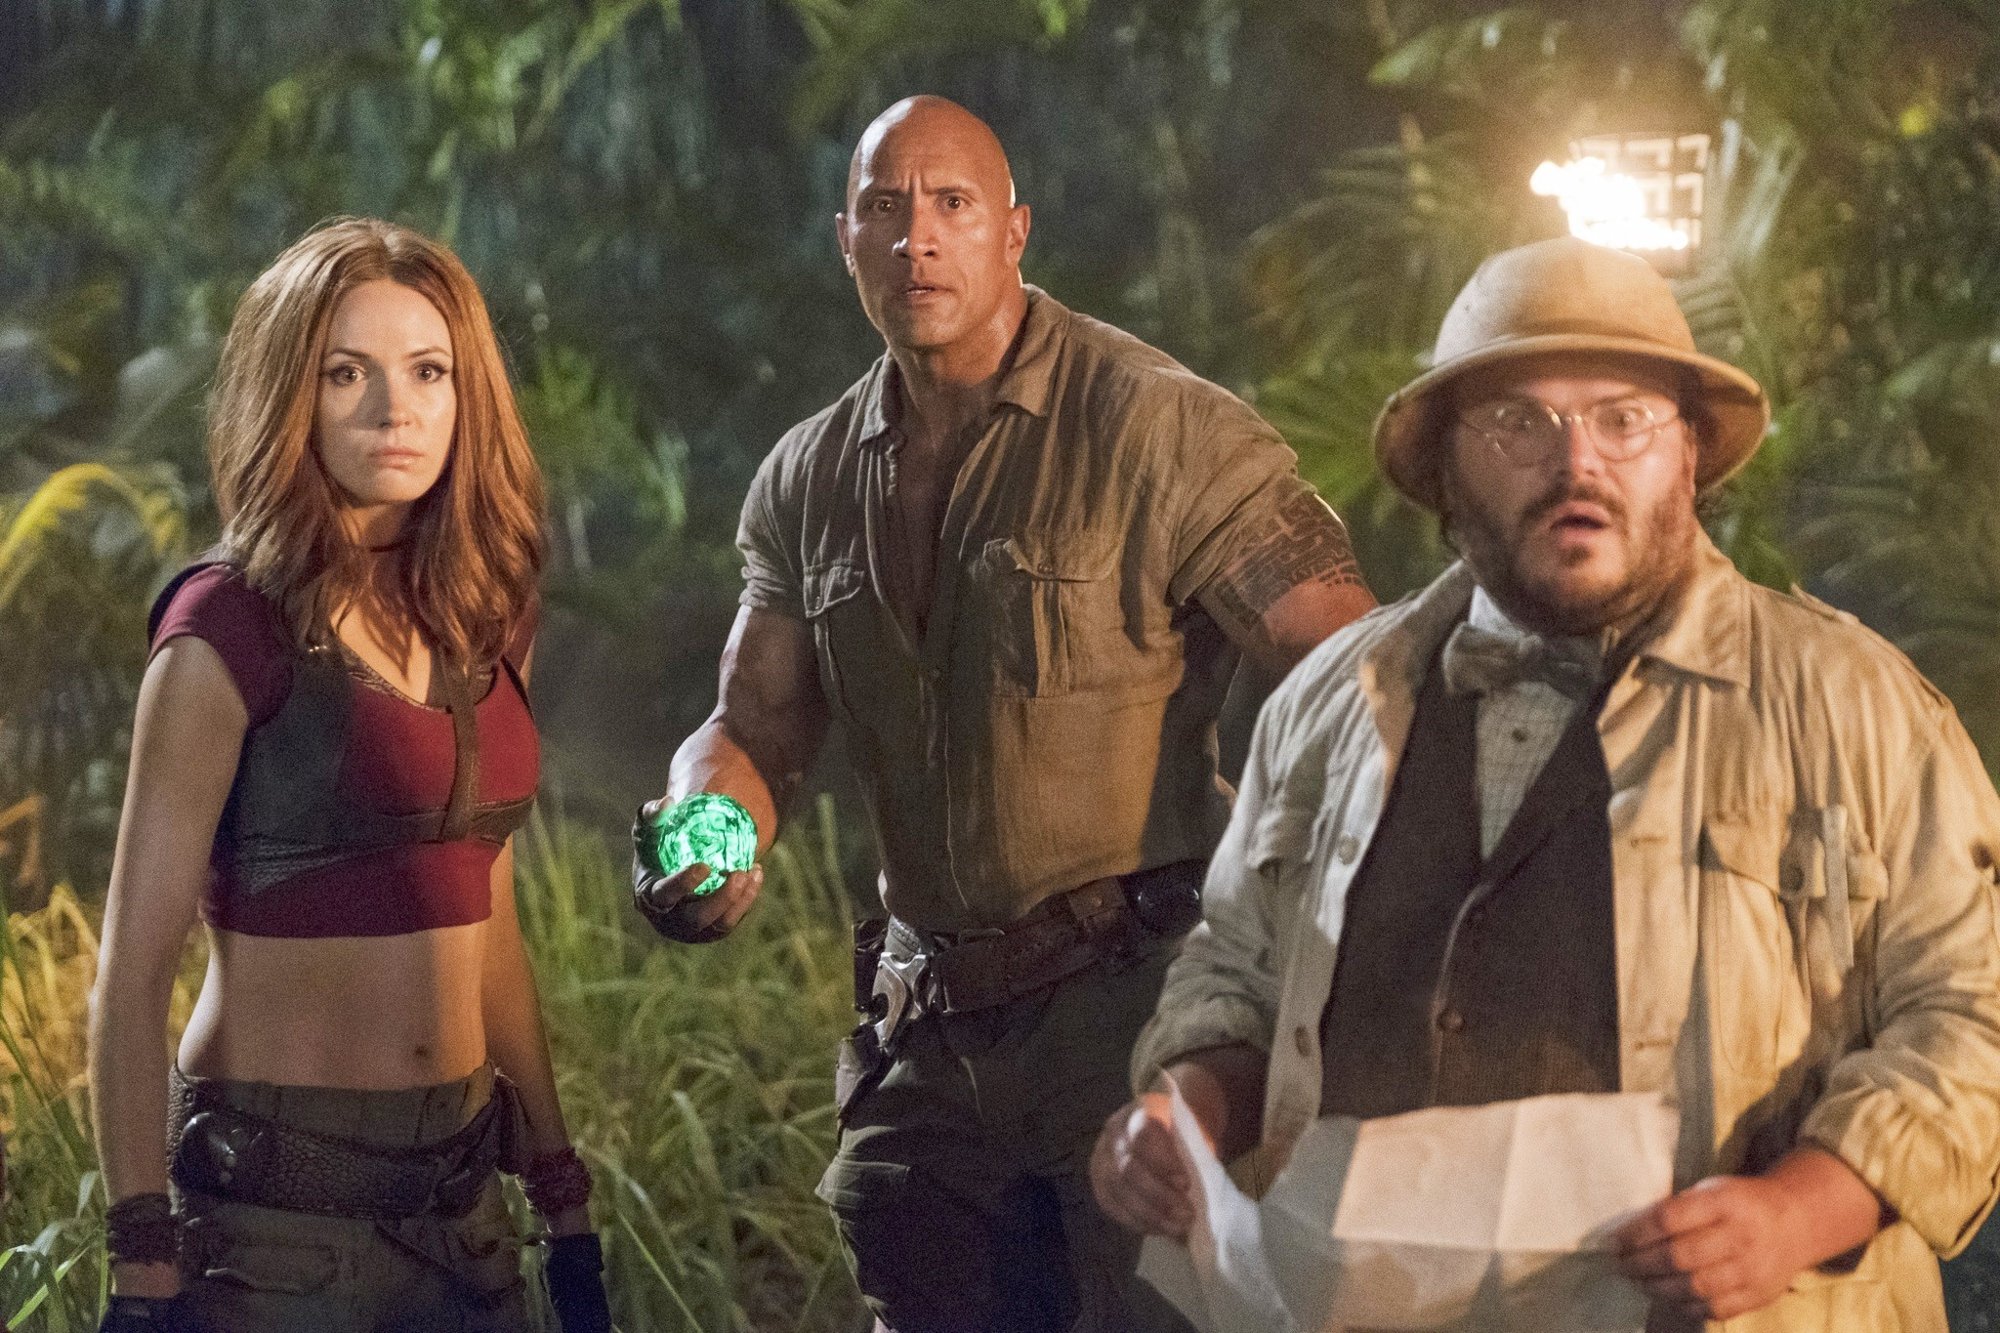 Karen Gillan, The Rock and Jack Black in Columbia Pictures' Jumanji: Welcome to the Jungle (2017)